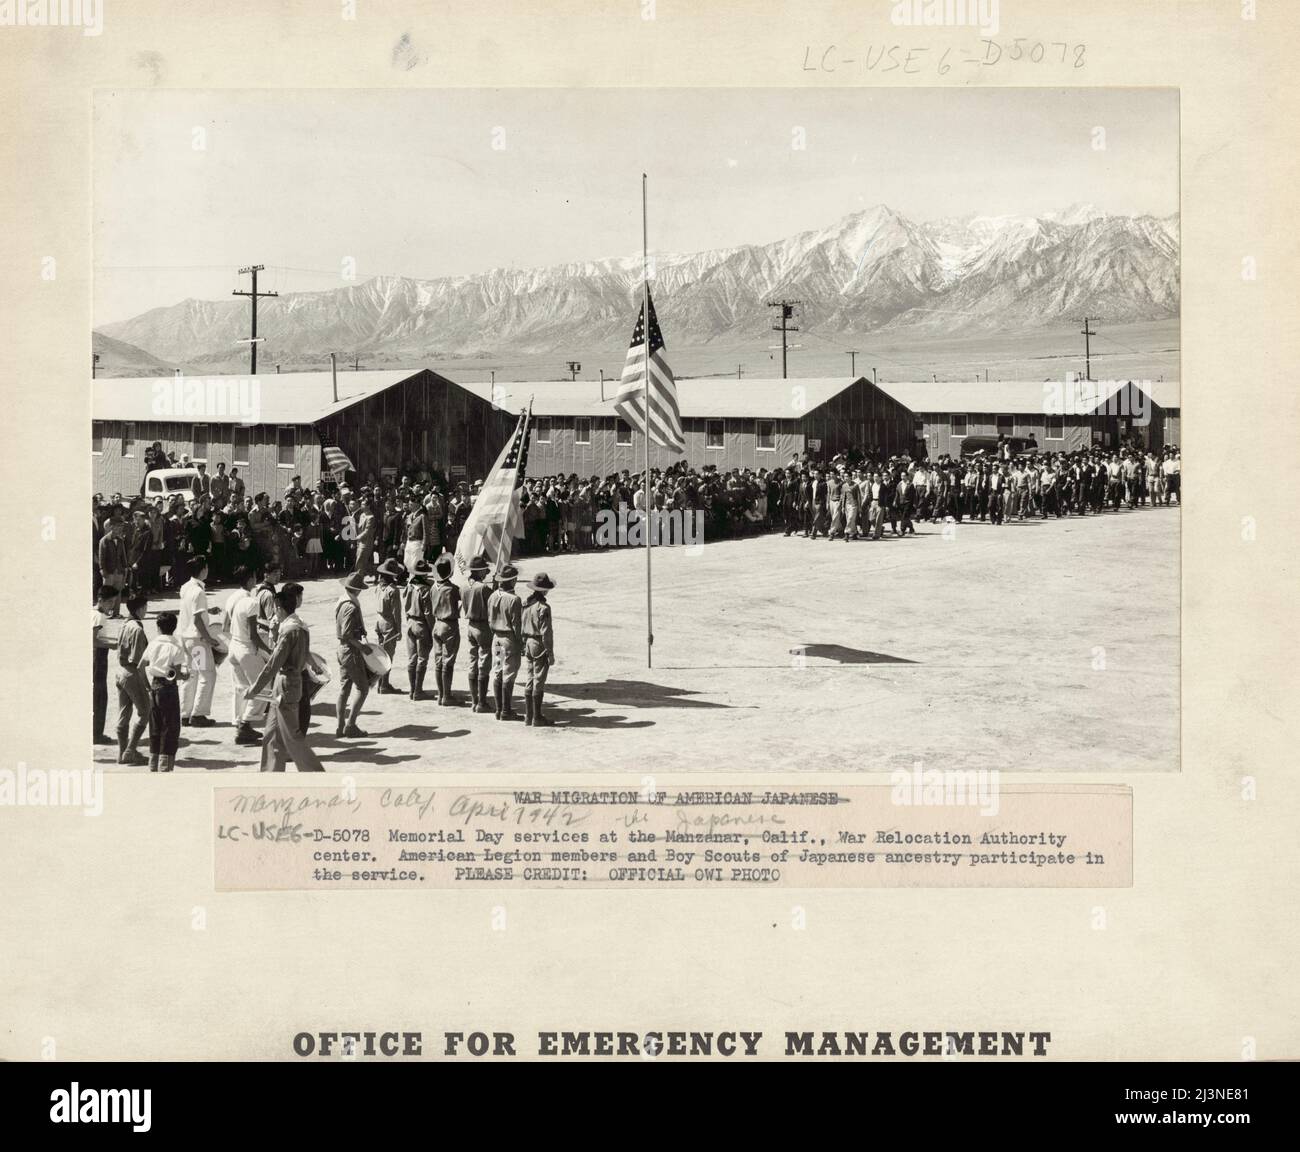 Japanese relocation, California. Memorial Day services at Manzanar, California, a War Relocation Authority center where evacuees of Japanese ancestry will spend the duration. American Legion members and Boy Scouts participated in the services. Stock Photo